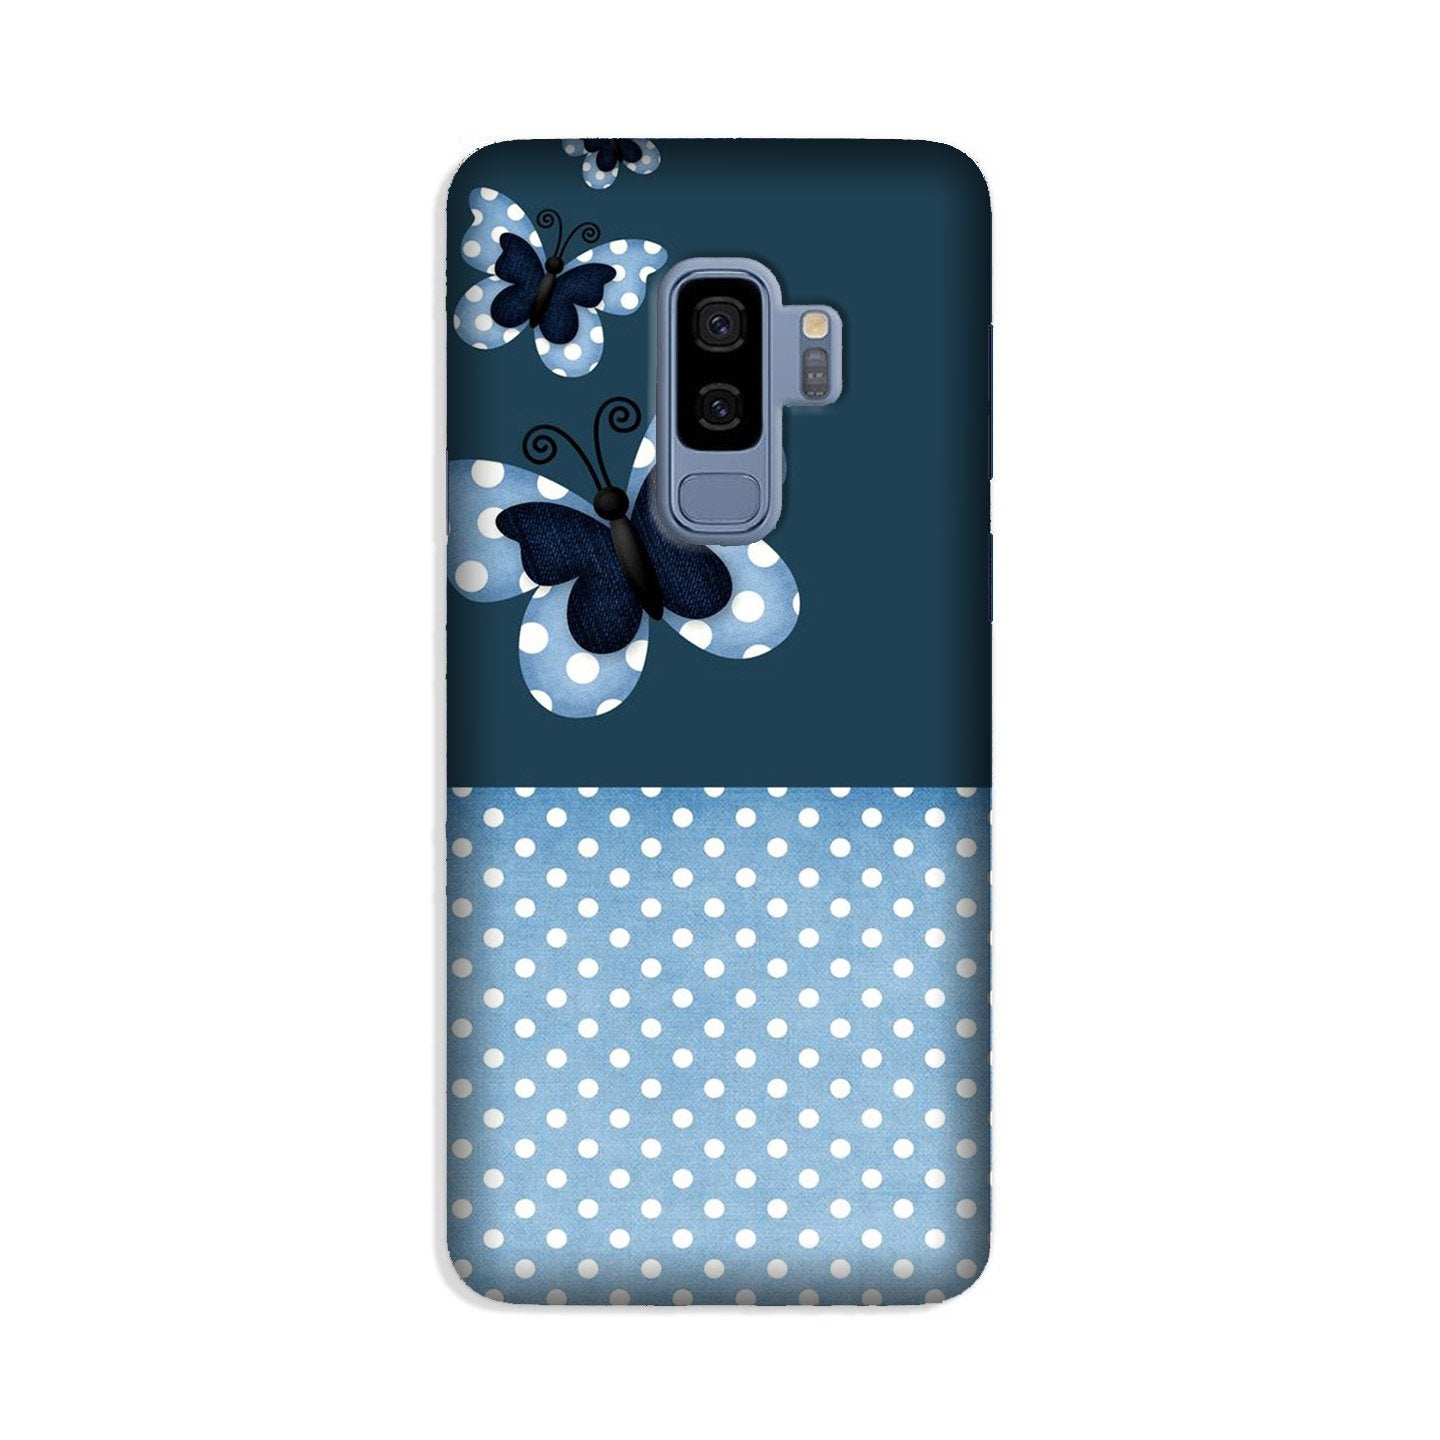 White dots Butterfly Case for Galaxy S9 Plus